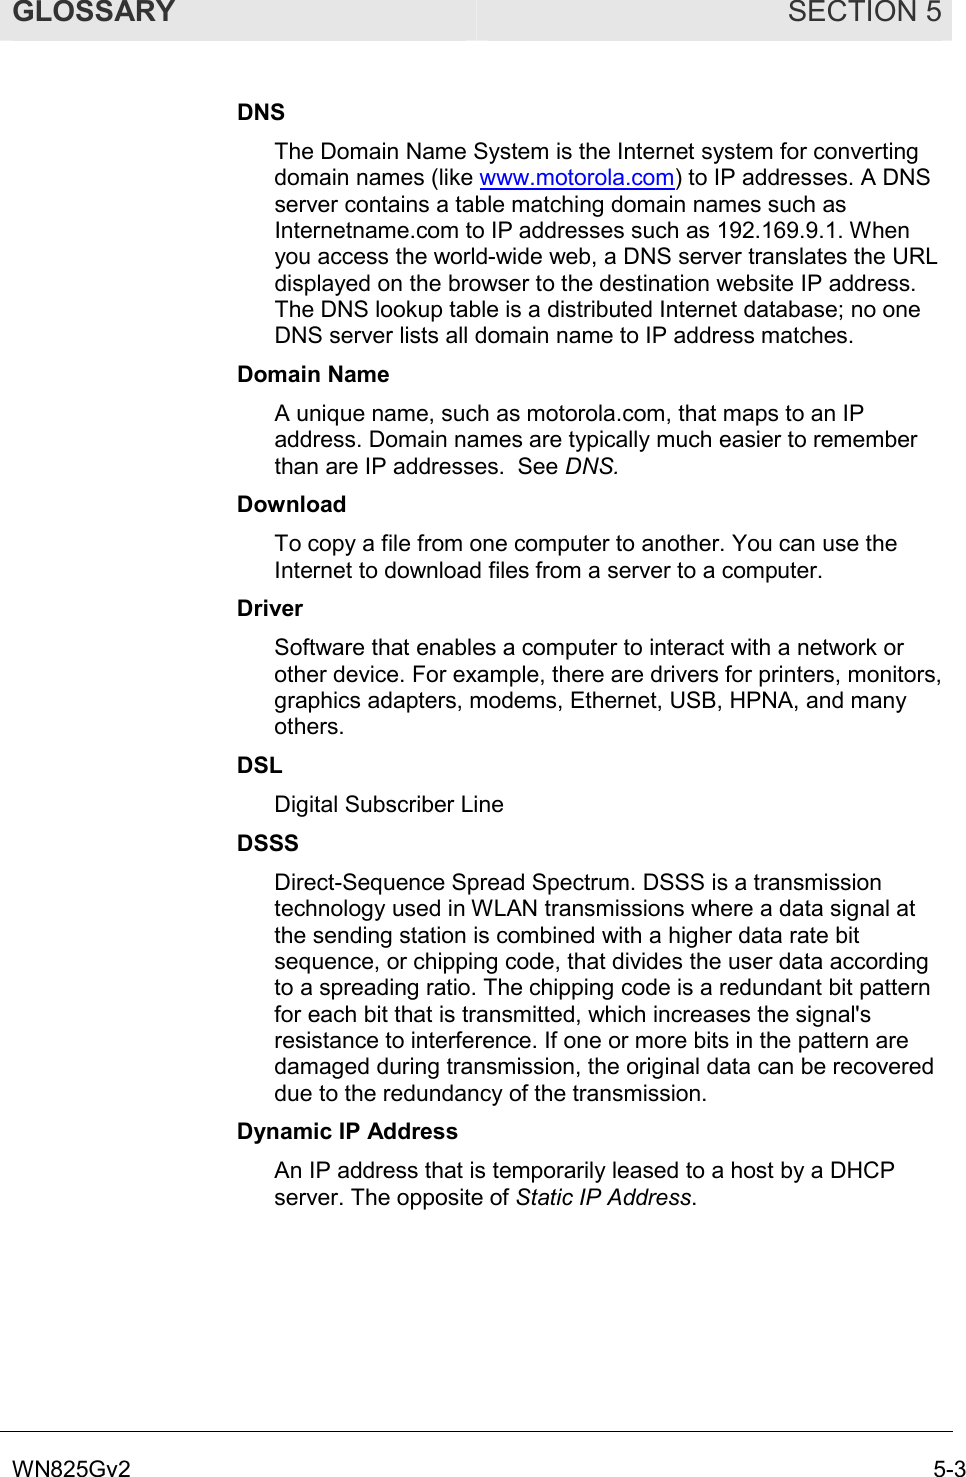 GLOSSARY SECTION 5 WN825Gv2  5-3 DNS The Domain Name System is the Internet system for converting domain names (like www.motorola.com) to IP addresses. A DNS server contains a table matching domain names such as Internetname.com to IP addresses such as 192.169.9.1. When you access the world-wide web, a DNS server translates the URL displayed on the browser to the destination website IP address. The DNS lookup table is a distributed Internet database; no one DNS server lists all domain name to IP address matches. Domain Name A unique name, such as motorola.com, that maps to an IP address. Domain names are typically much easier to remember than are IP addresses.  See DNS. Download To copy a file from one computer to another. You can use the Internet to download files from a server to a computer.  Driver Software that enables a computer to interact with a network or other device. For example, there are drivers for printers, monitors, graphics adapters, modems, Ethernet, USB, HPNA, and many others. DSL Digital Subscriber Line DSSS Direct-Sequence Spread Spectrum. DSSS is a transmission technology used in WLAN transmissions where a data signal at the sending station is combined with a higher data rate bit sequence, or chipping code, that divides the user data according to a spreading ratio. The chipping code is a redundant bit pattern for each bit that is transmitted, which increases the signal&apos;s resistance to interference. If one or more bits in the pattern are damaged during transmission, the original data can be recovered due to the redundancy of the transmission.  Dynamic IP Address An IP address that is temporarily leased to a host by a DHCP server. The opposite of Static IP Address. 